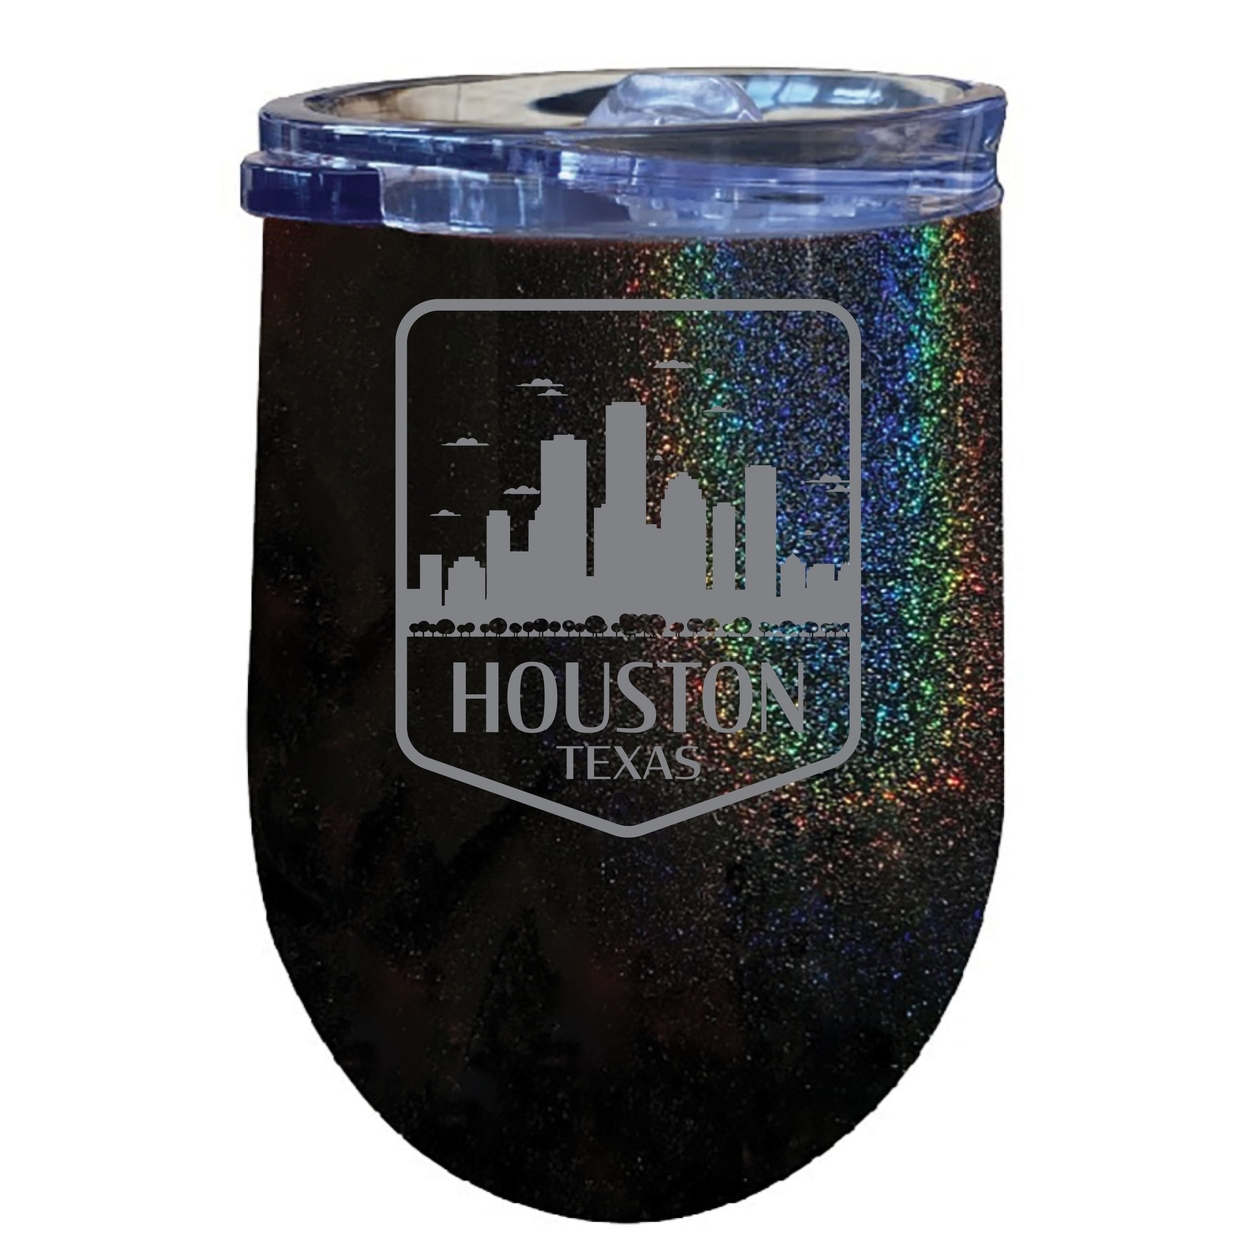 Houston Texas Souvenir 12 Oz Engraved Insulated Wine Stainless Steel Tumbler - Coral,,2-Pack